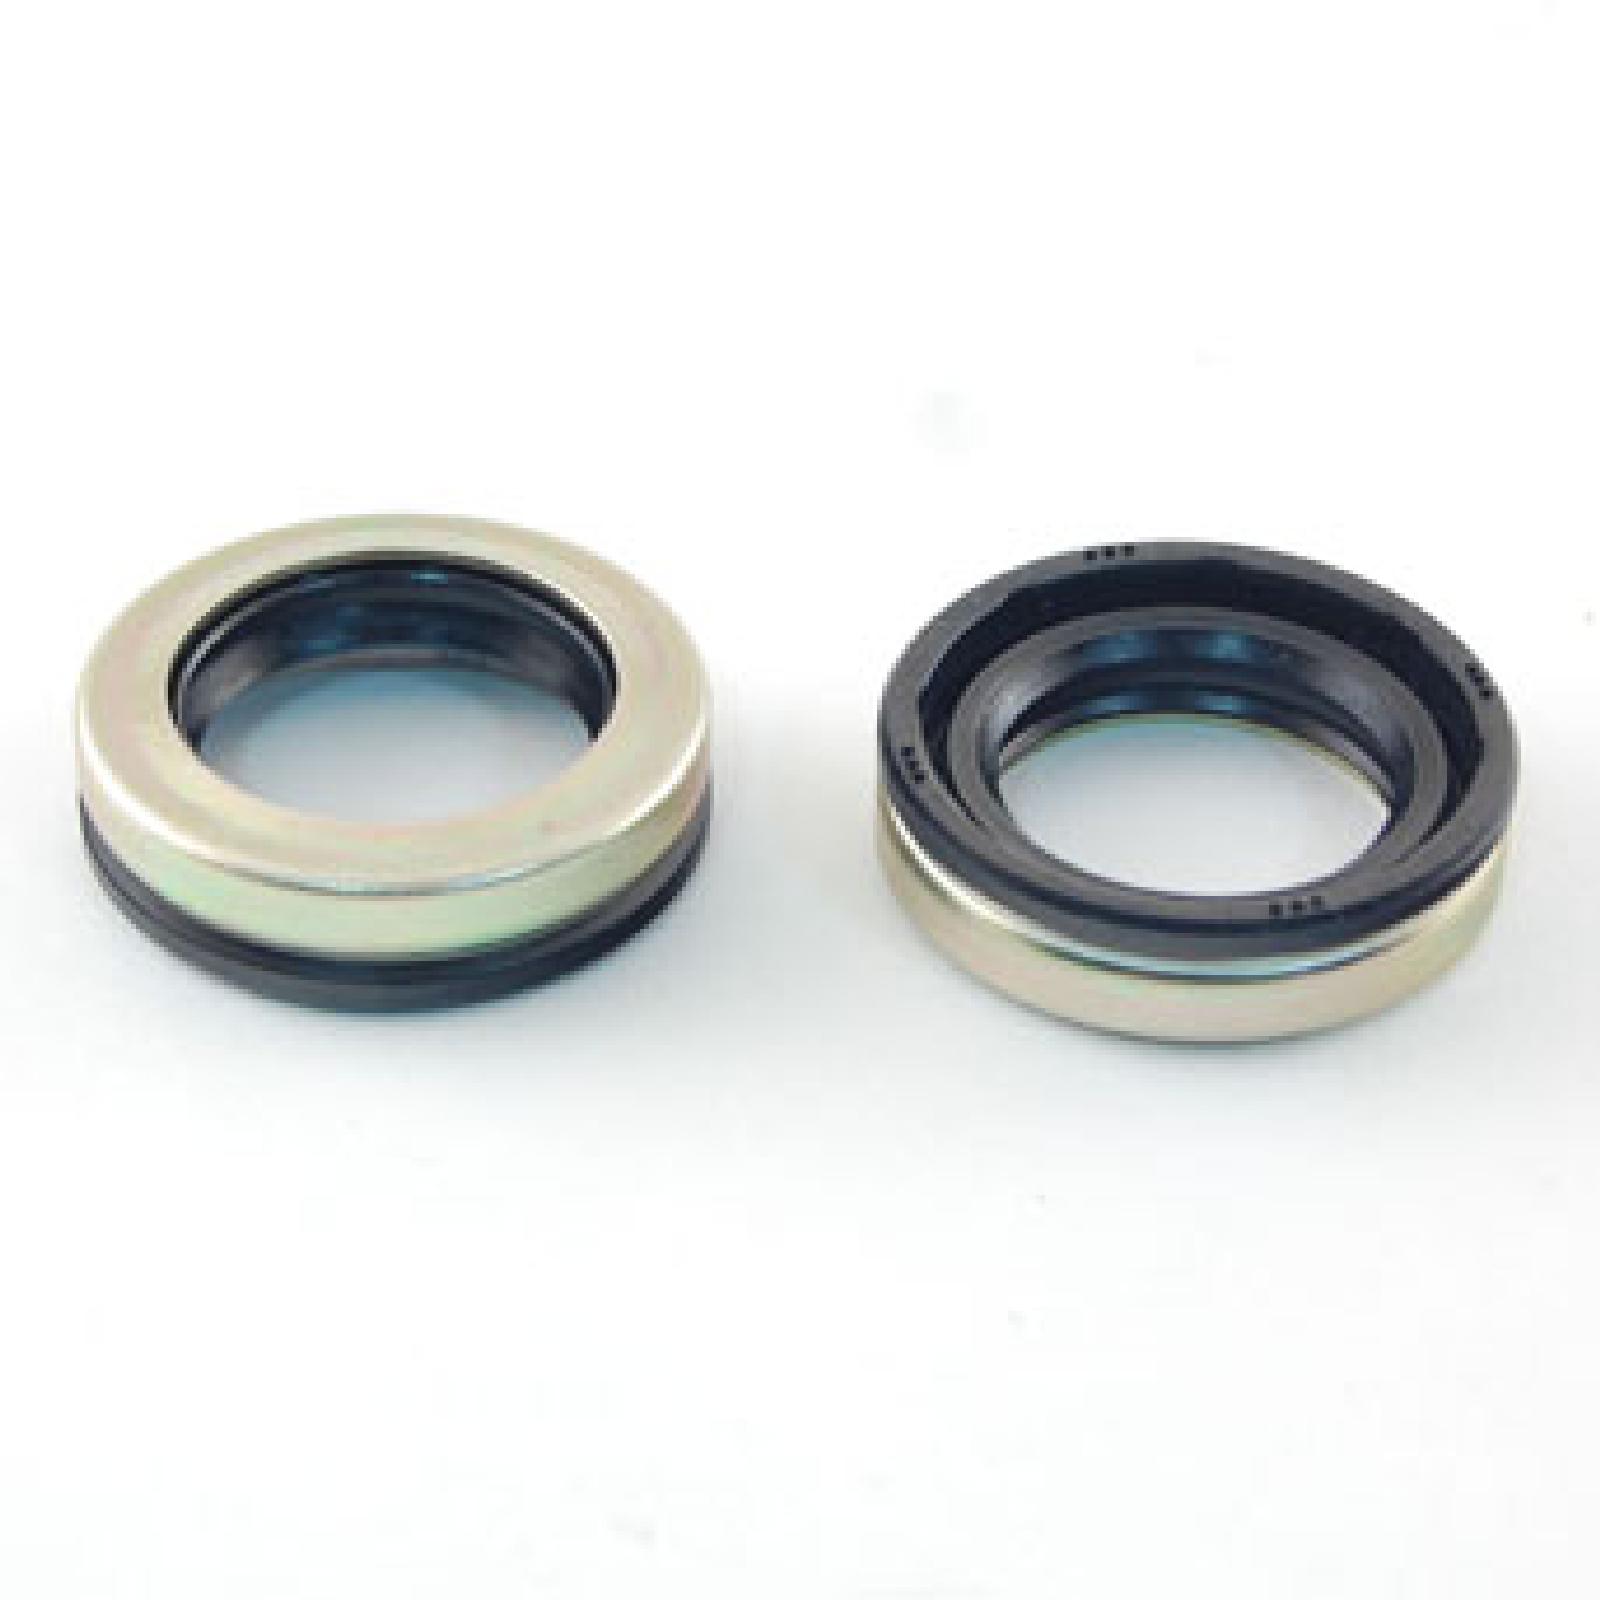 KIT OIL SEAL 12155 part# 1915308 by MTD